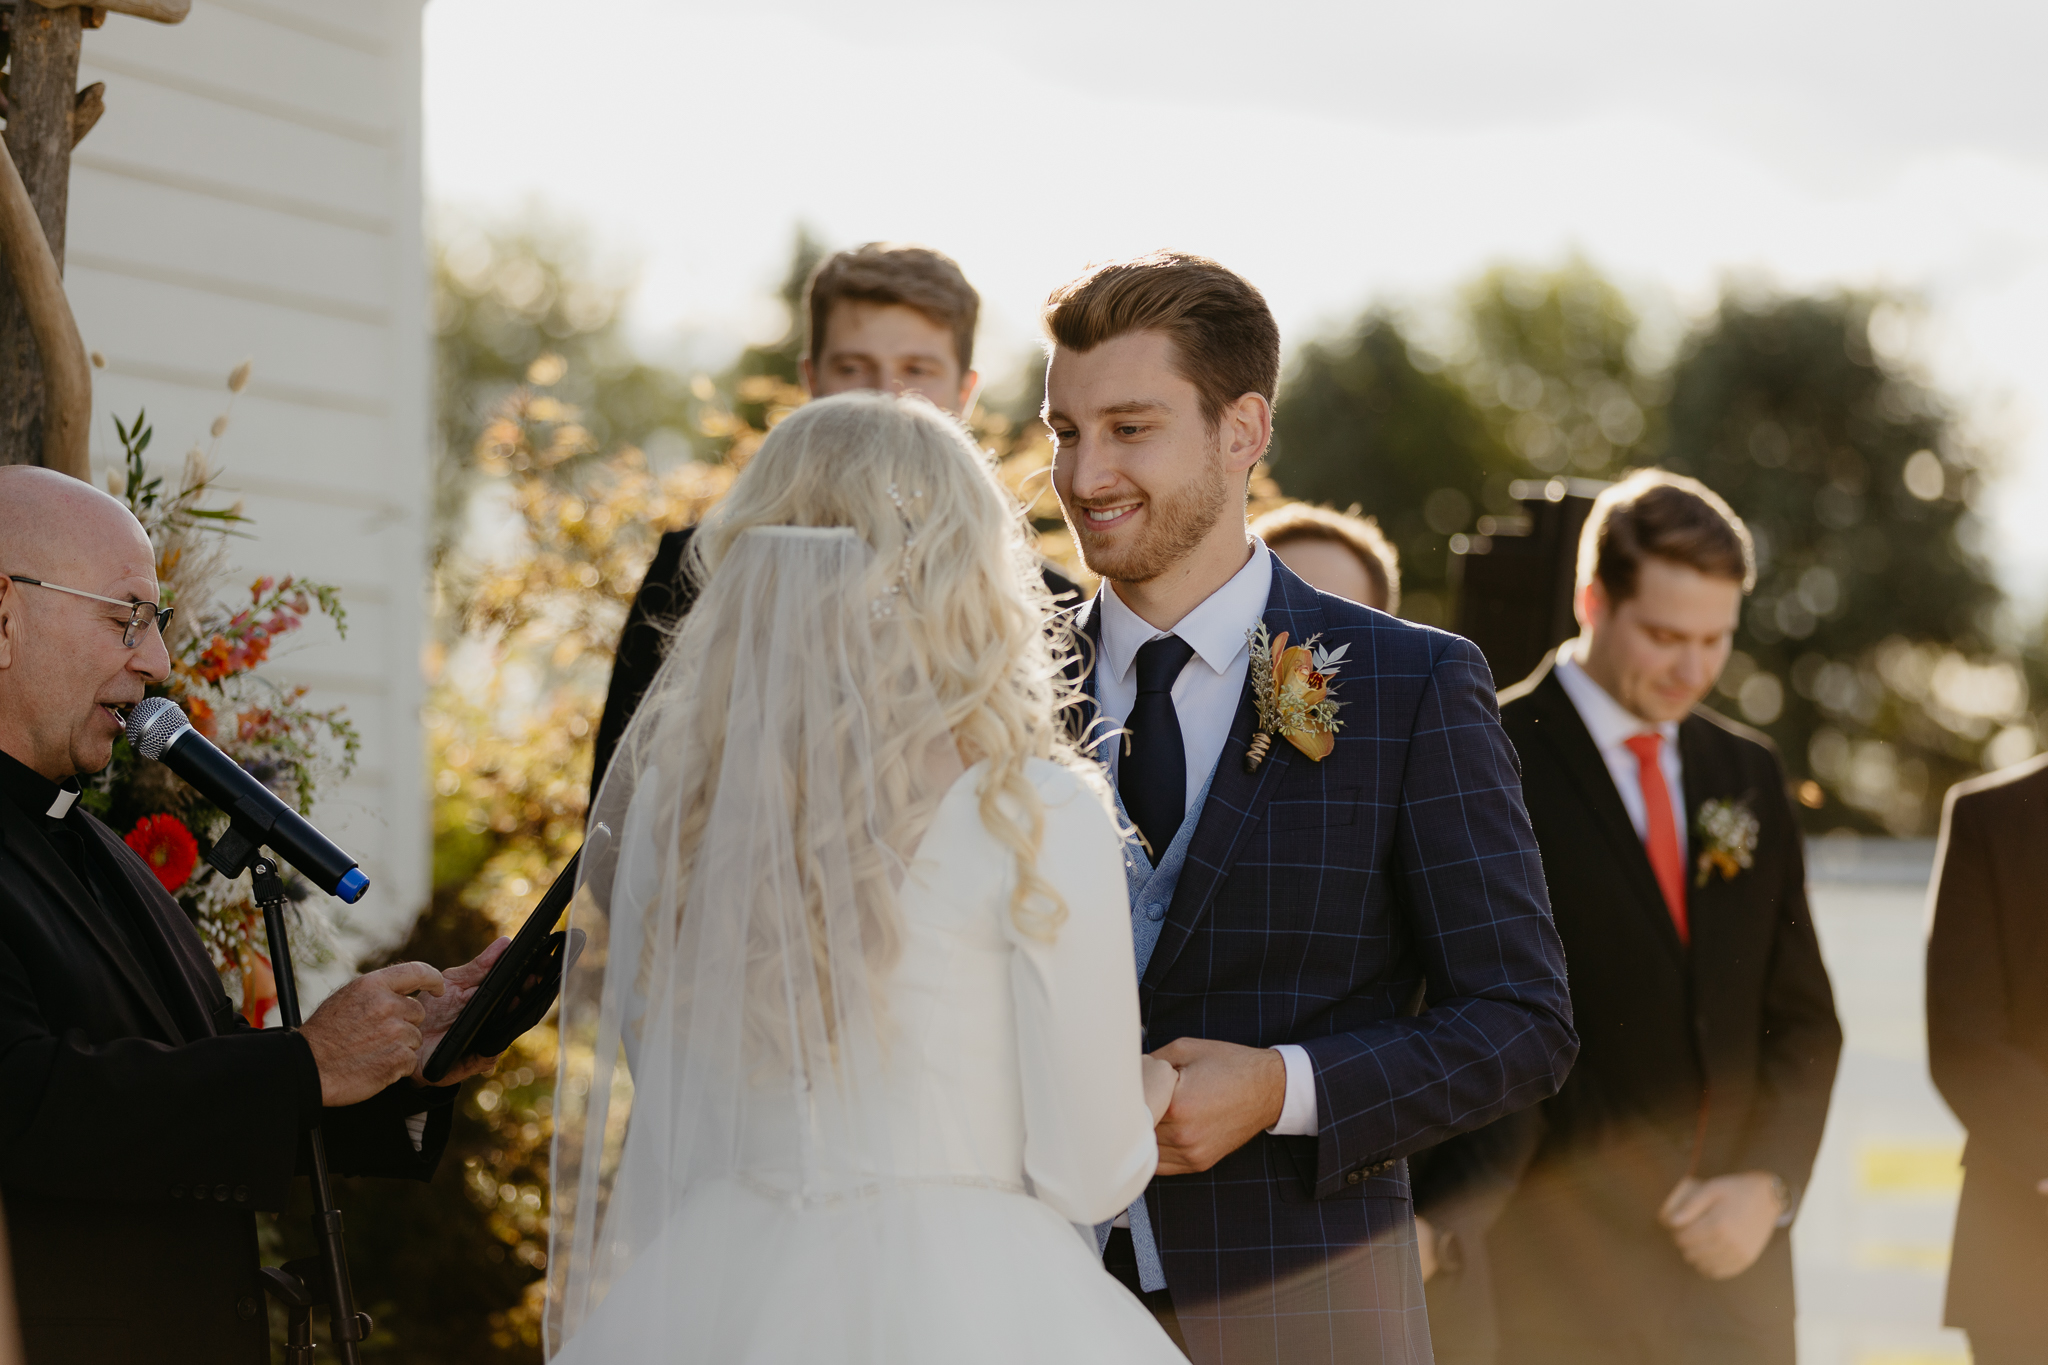 Groom smiling at his bride and holding his hands while exchanging vows at their outdoor wedding ceremony